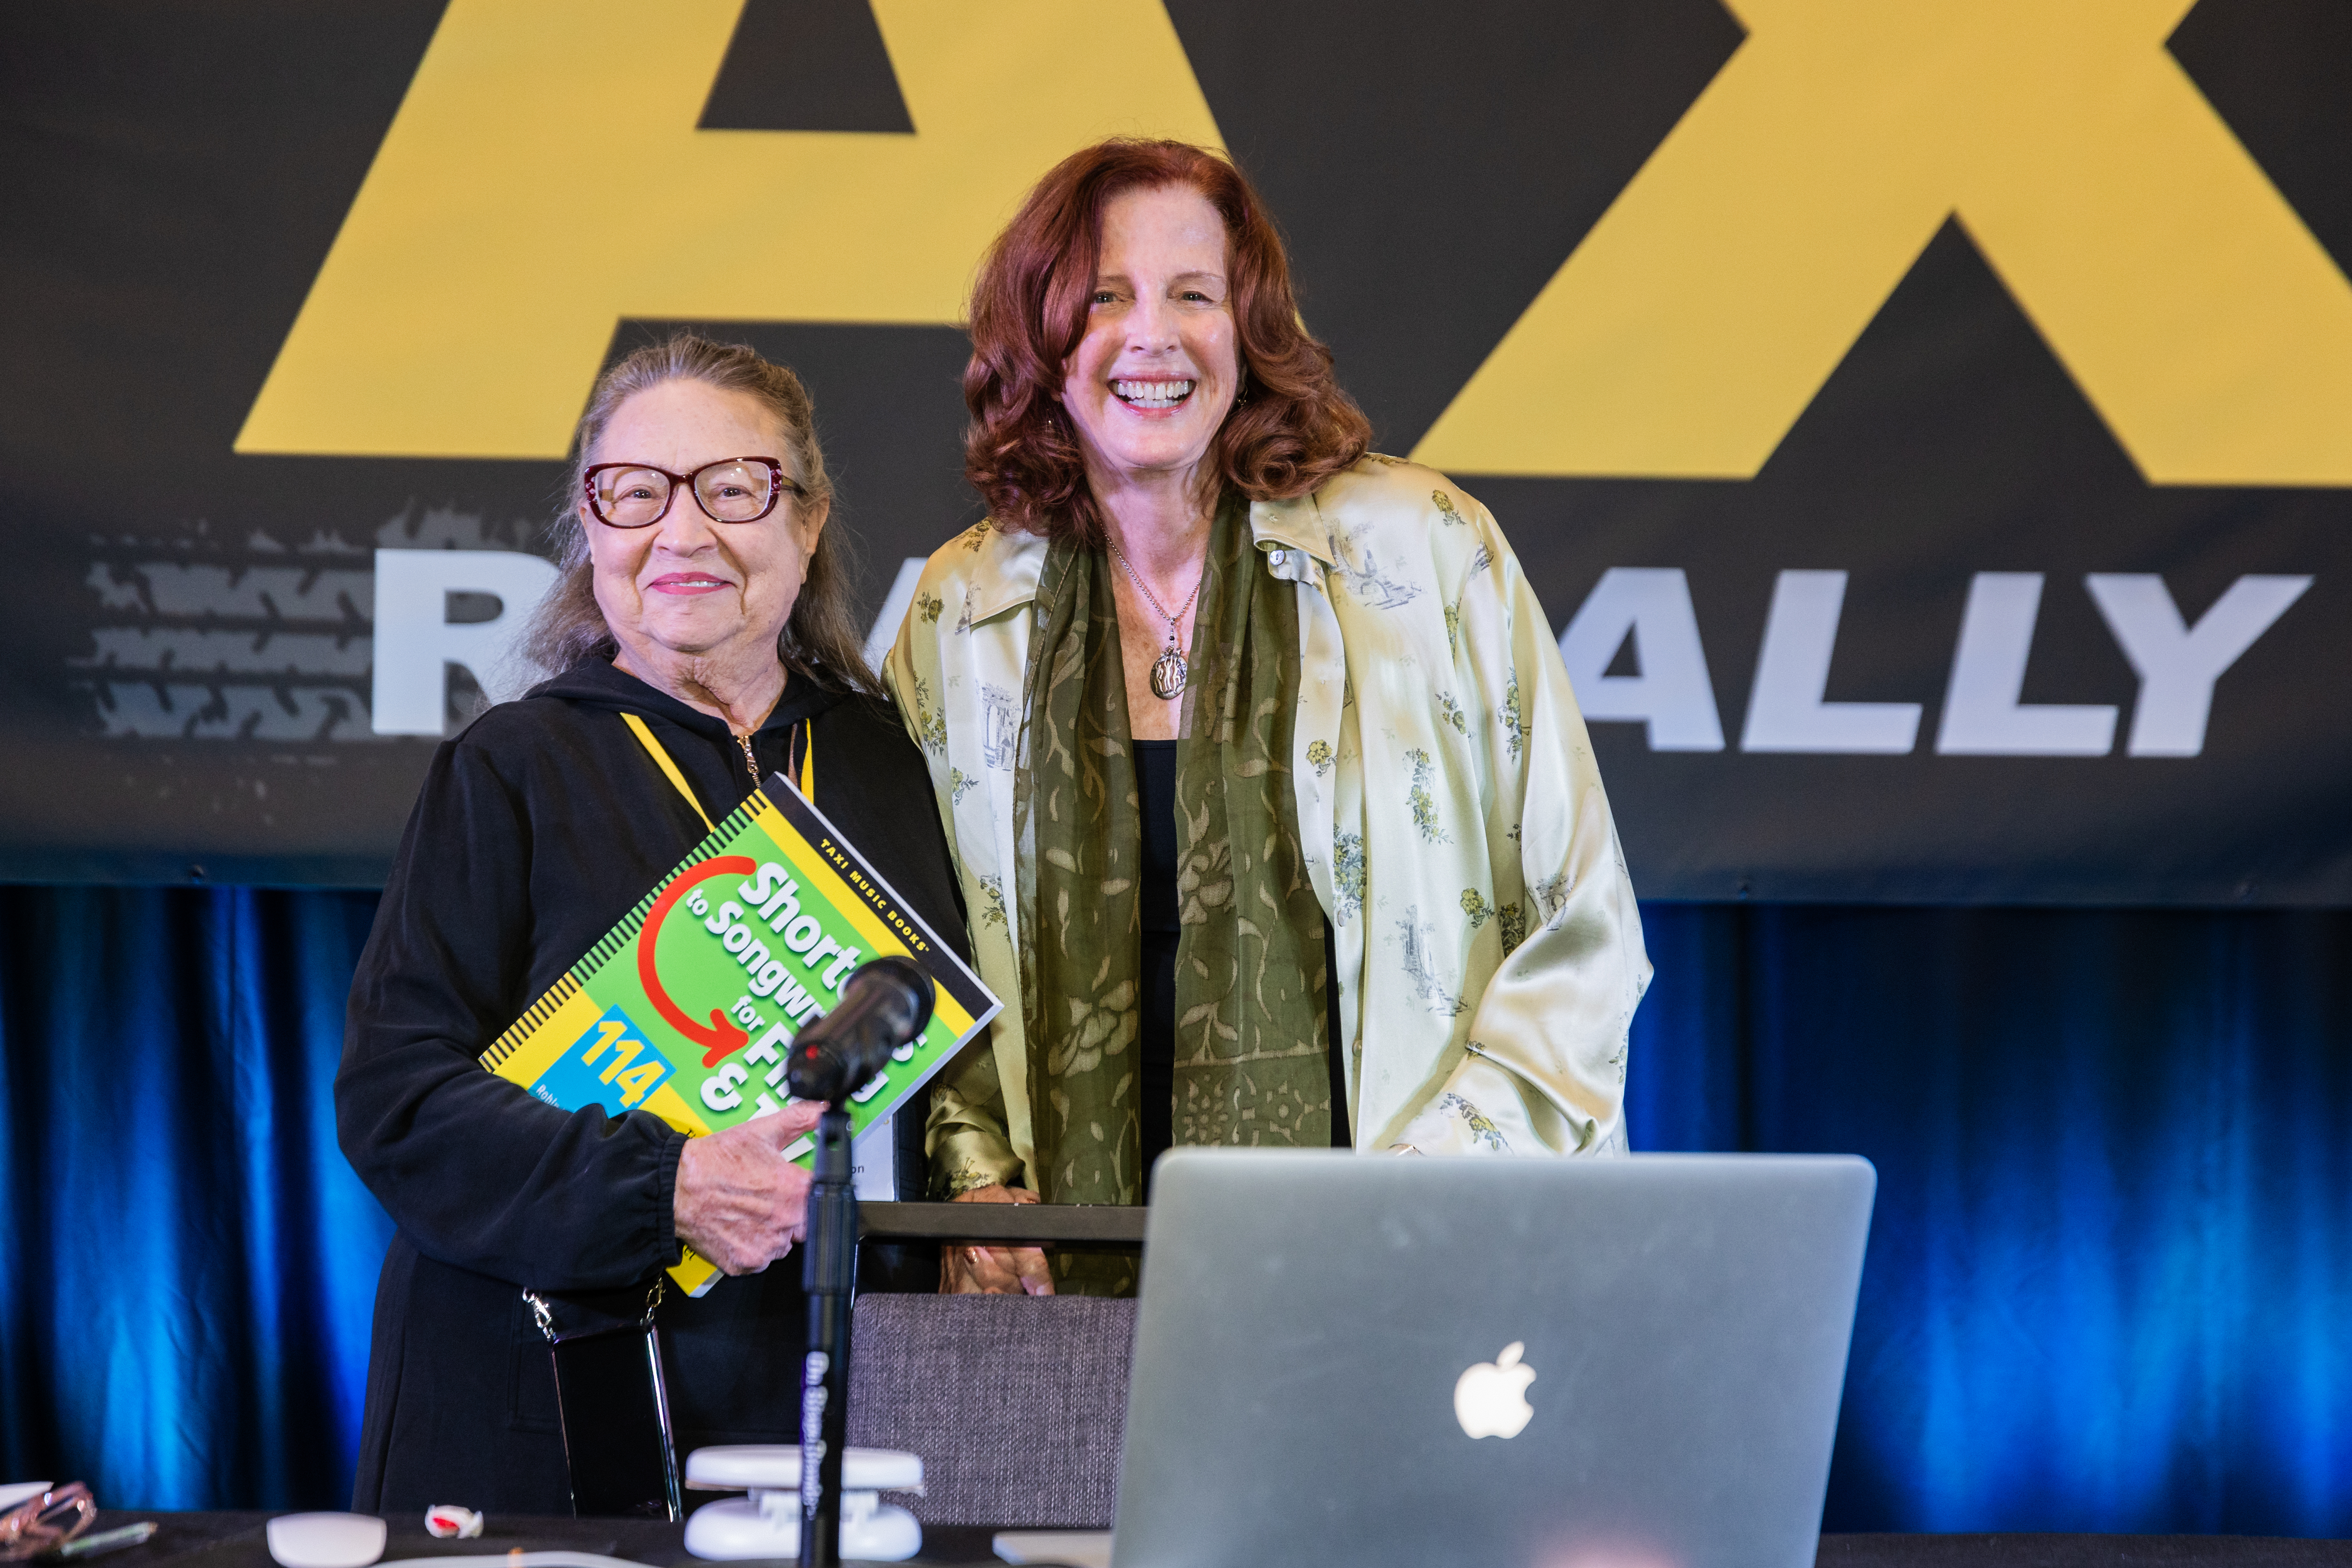 TAXI member Betty Anderson was all smiles when she won a copy of Shortcuts to Hit Songwriting by Author and Songwriting coach Robin Frederick, who packed the ballroom as always. Robin never disappoints!